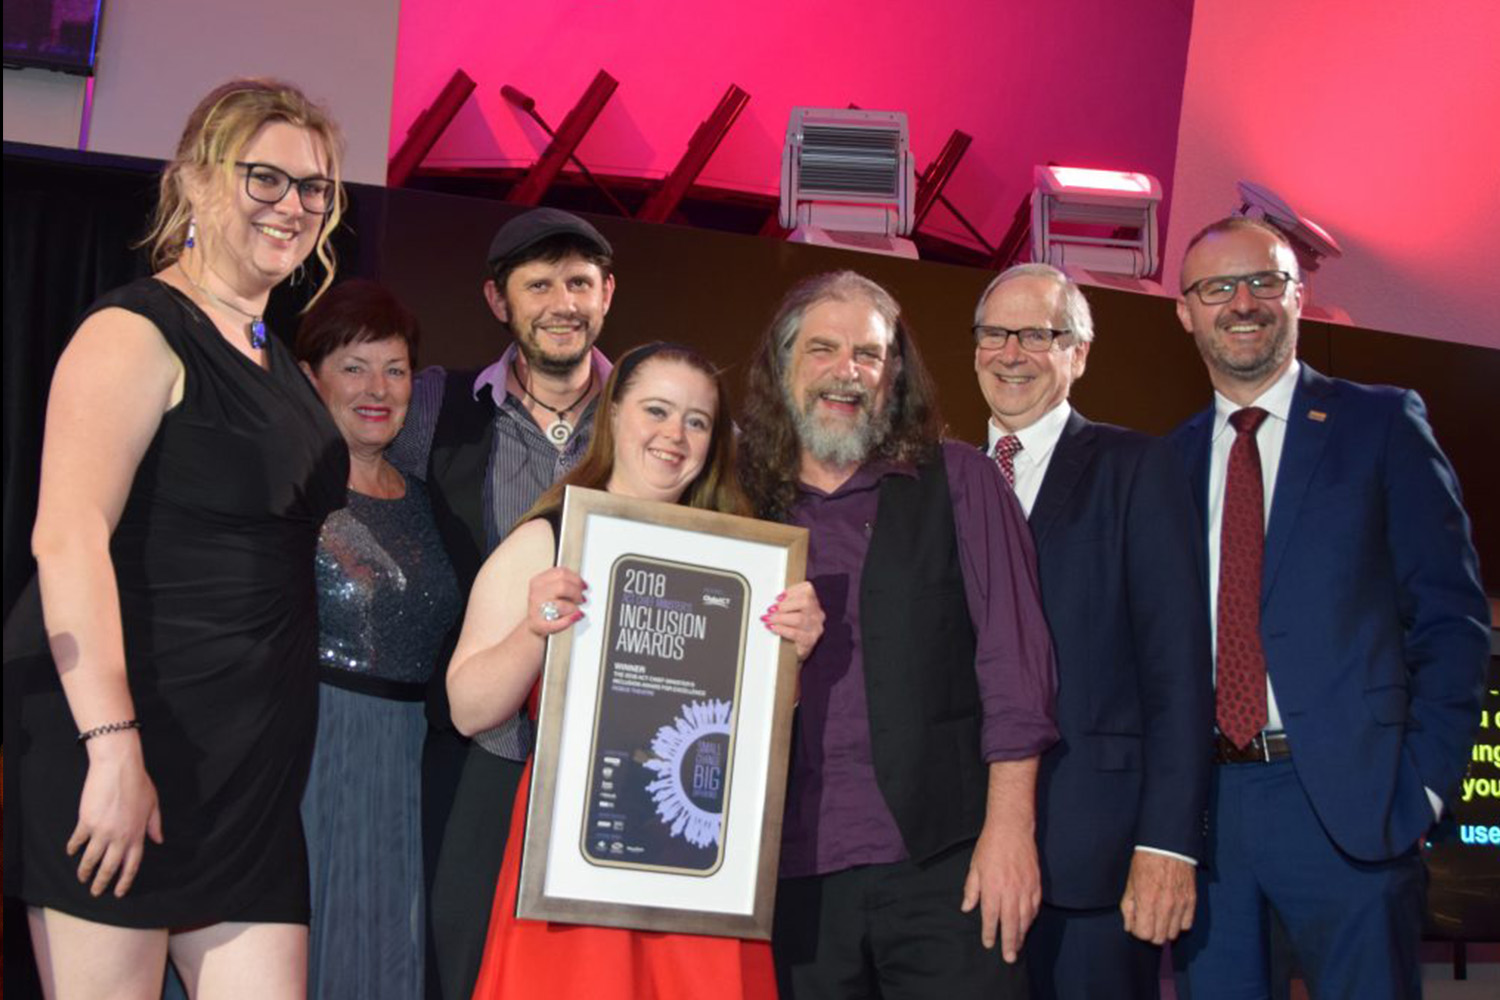 A group of people smile at the camera with an award